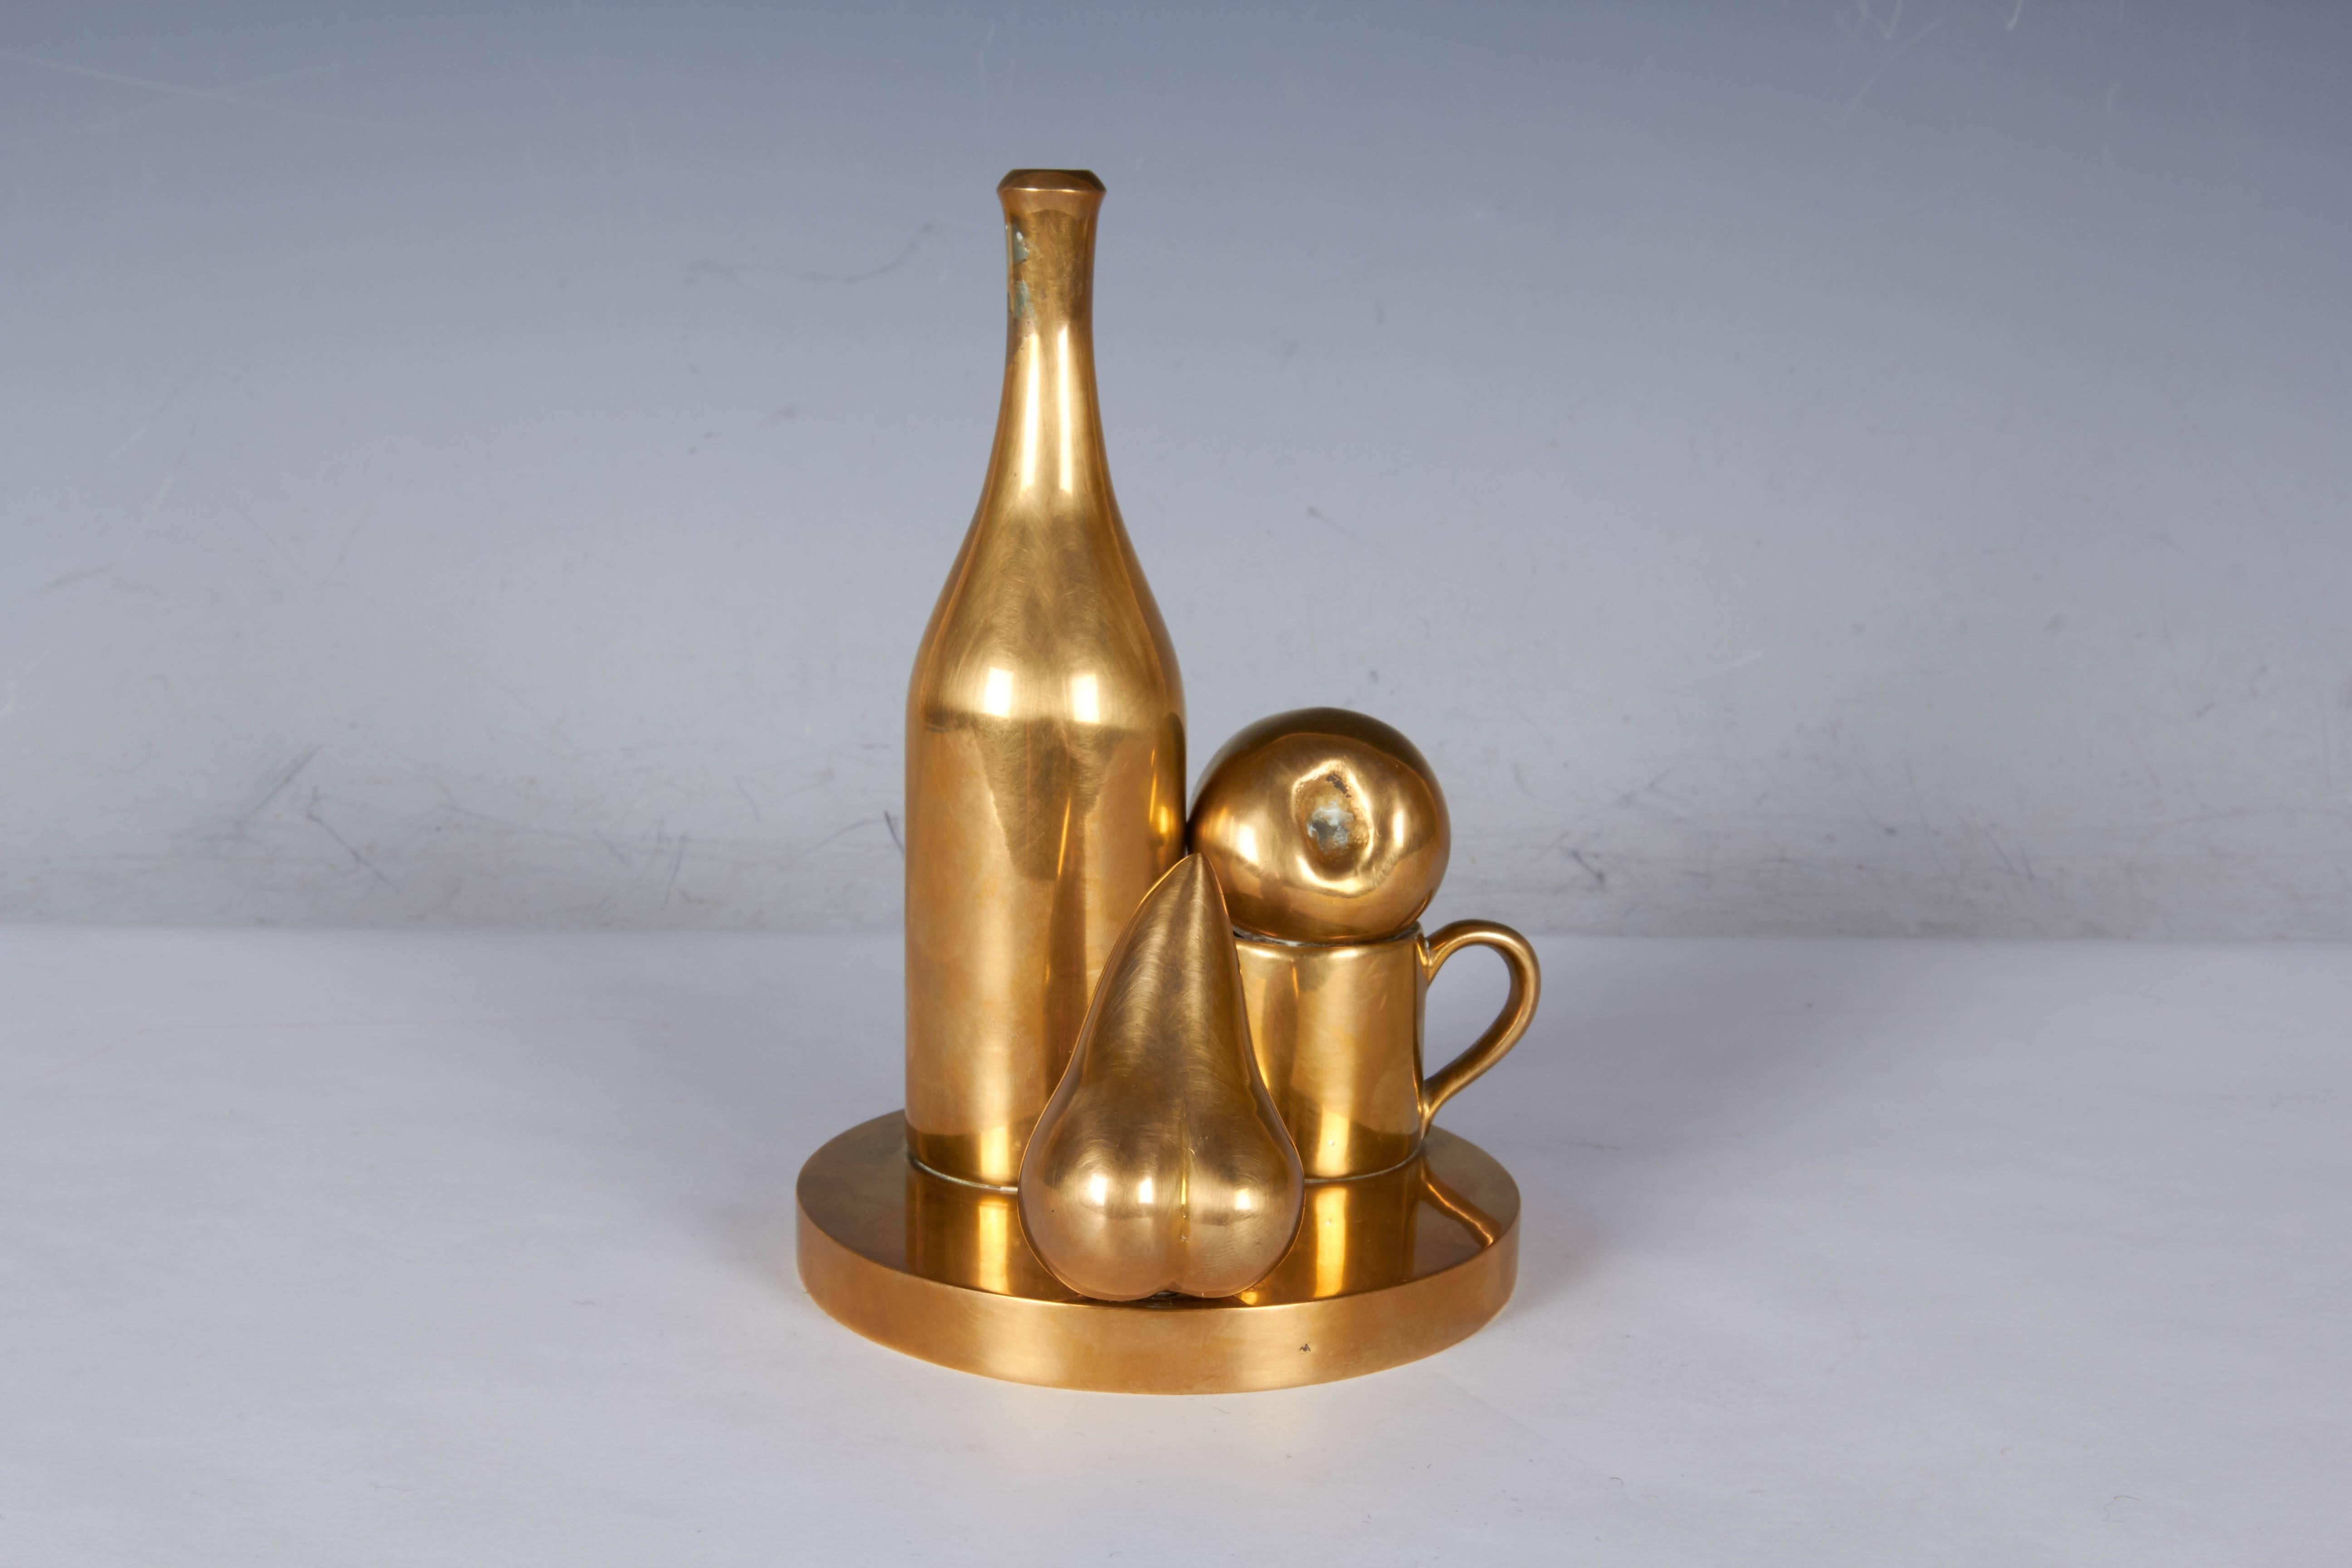 Paul Suttman (American, 1933-1993) was widely known as a representational artist, working within a variety of mediums and styles, eventually travelling to Italy and France to pursue studies in bronze-casting. During the 1970s he had begun creating